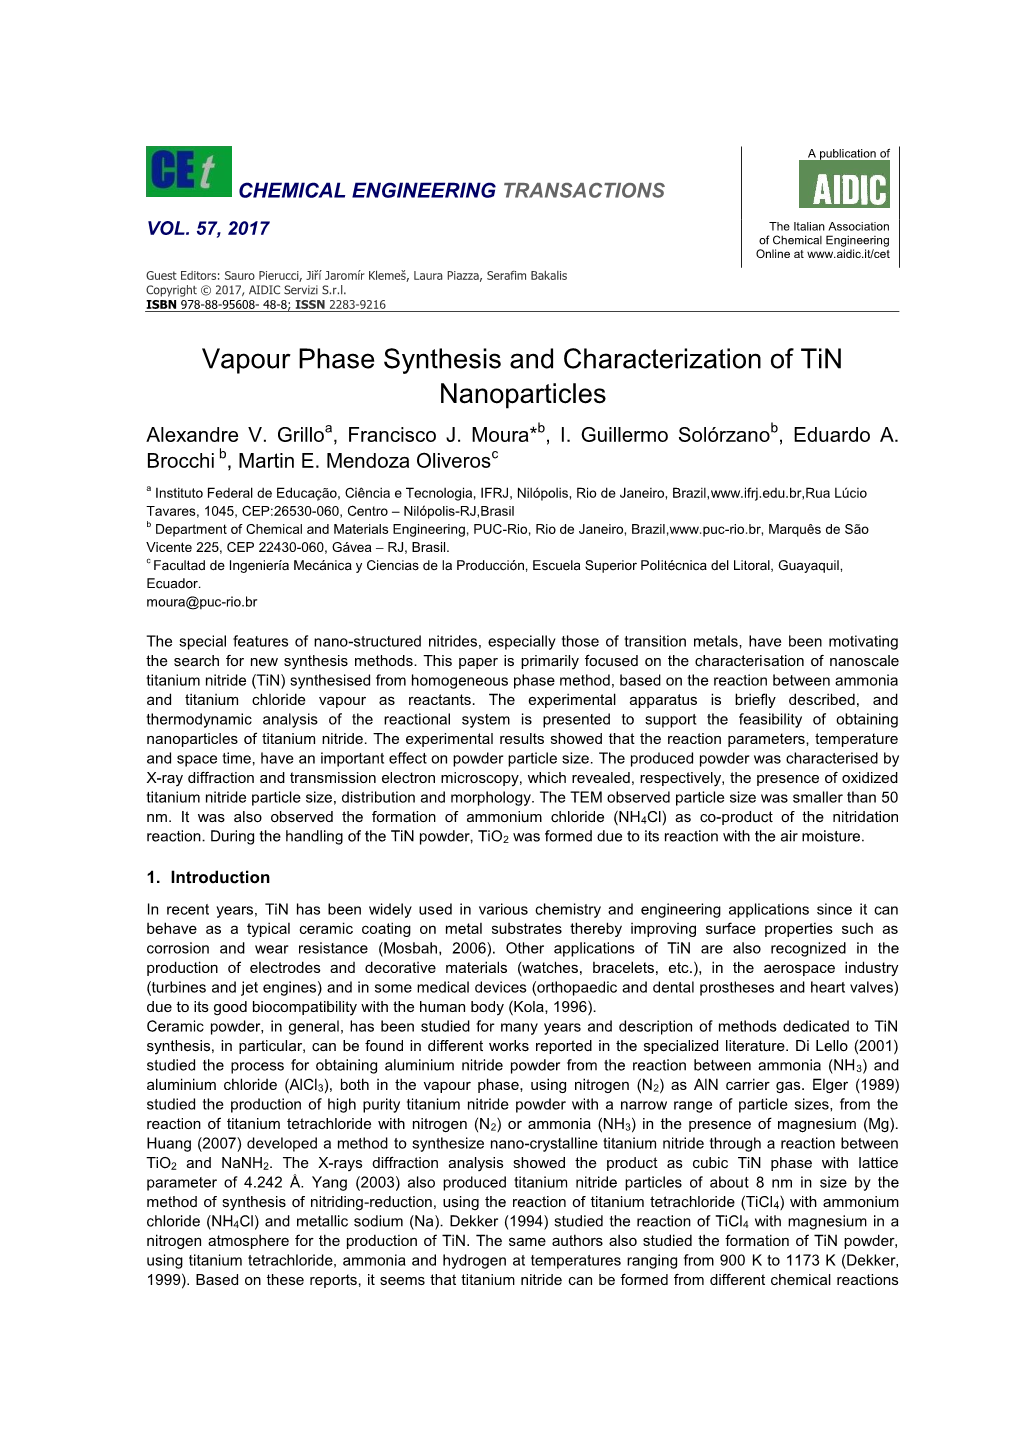 Vapour Phase Synthesis and Characterization of Tin Nanoparticles Alexandre V